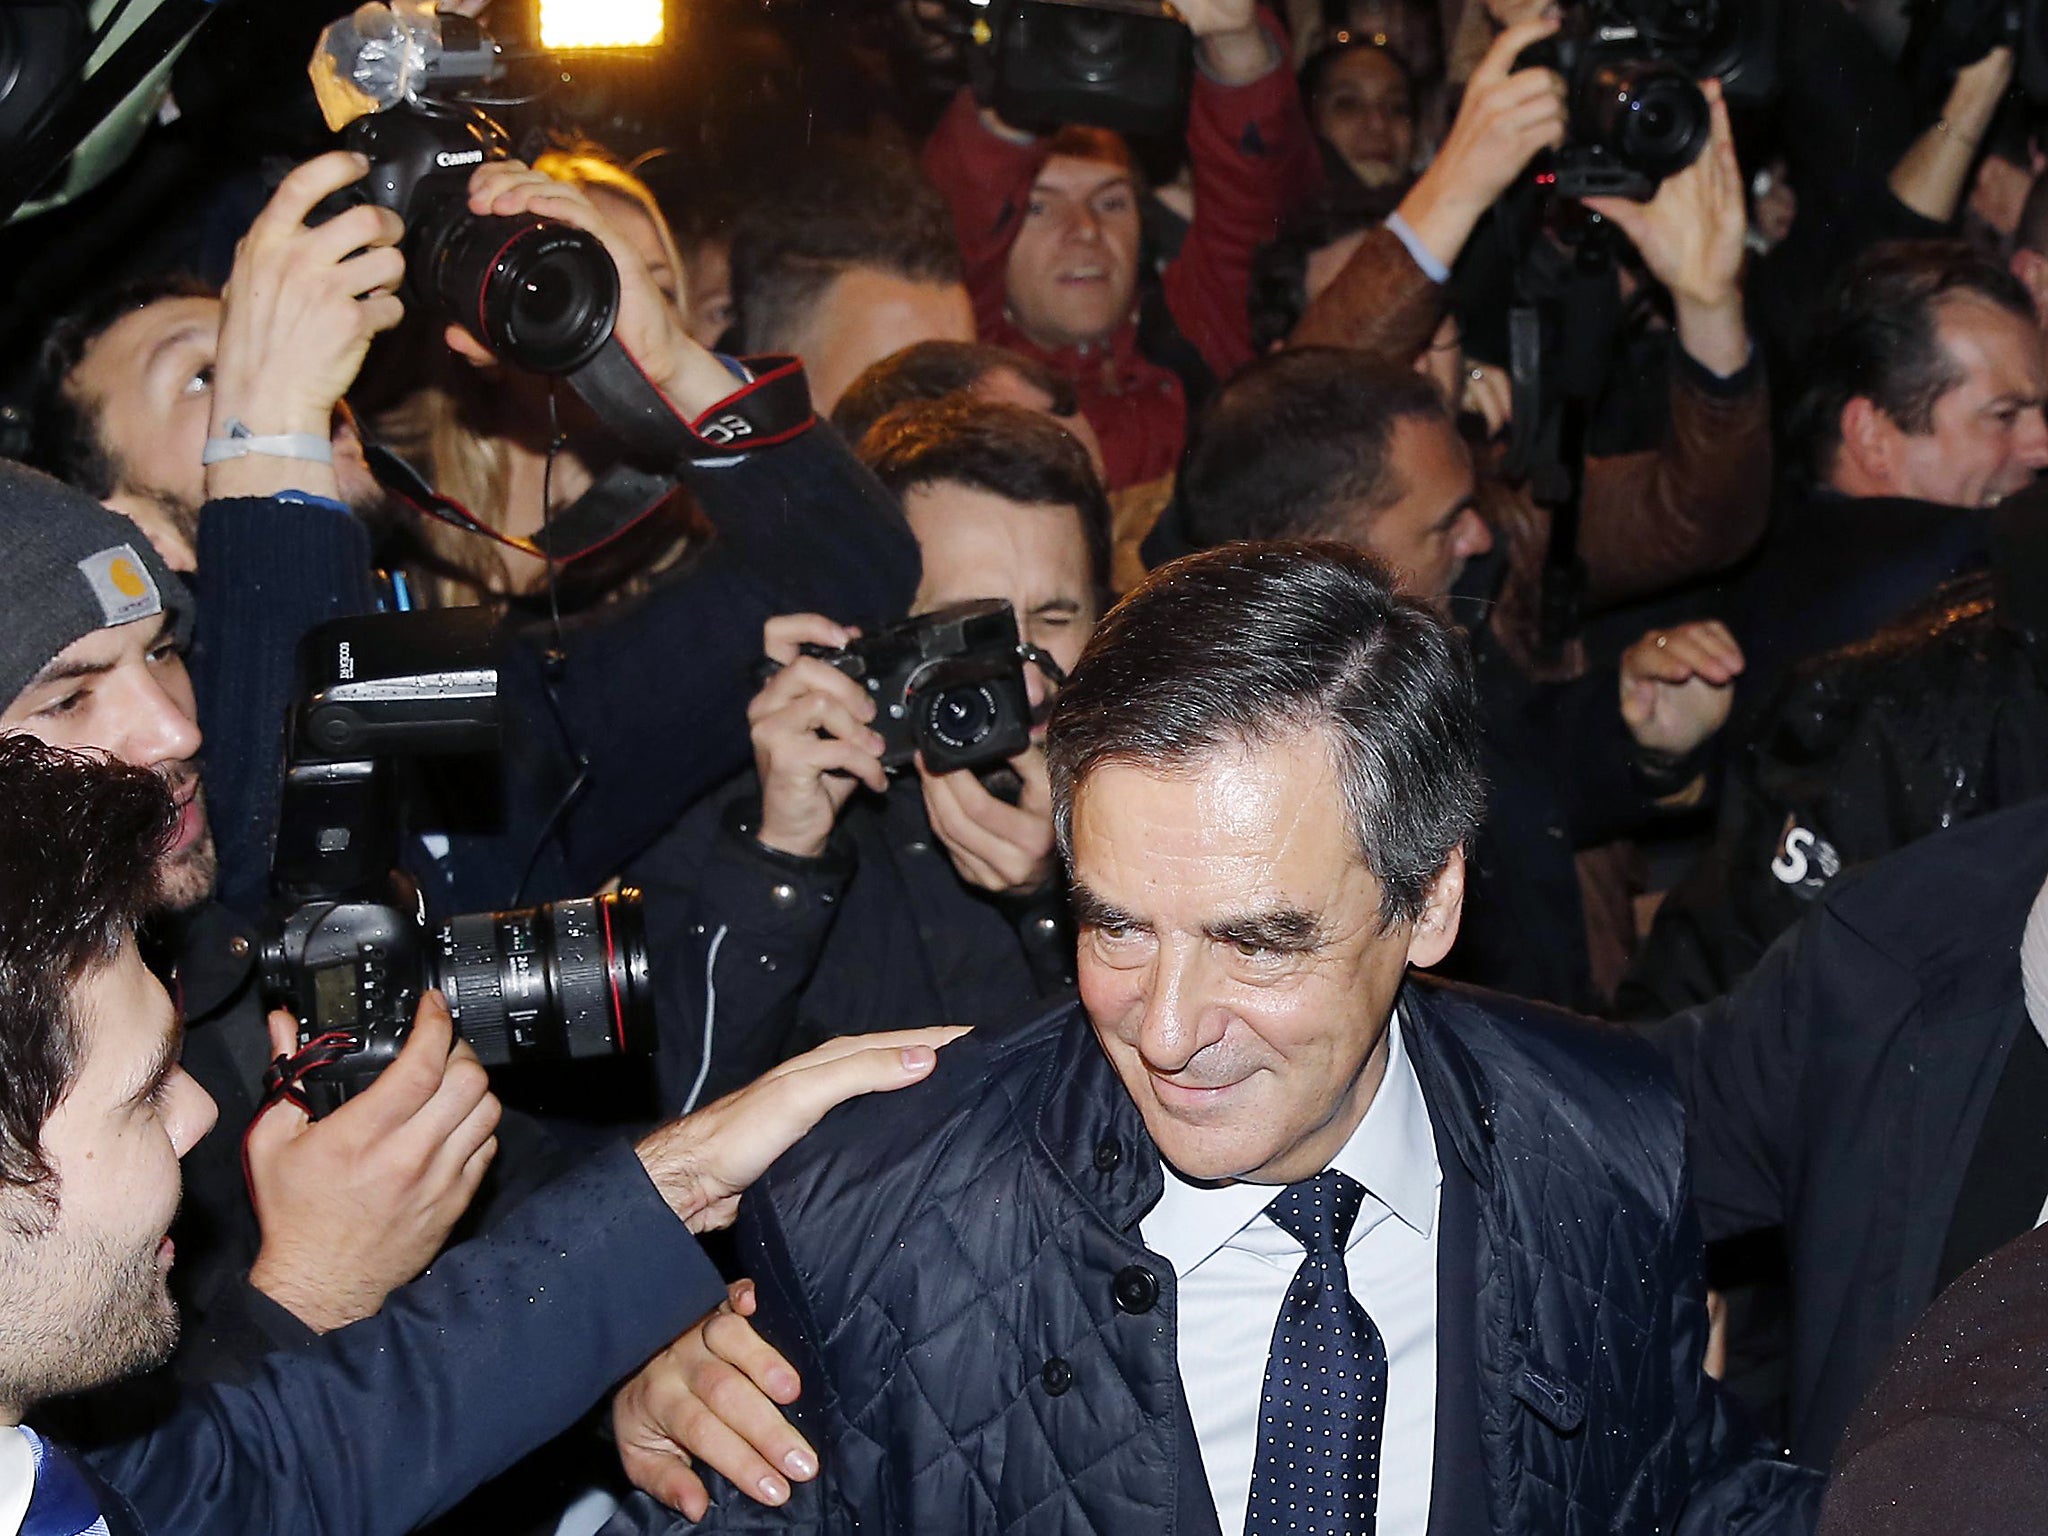 French presidential hopeful François Fillon faces inquiry over payments to his wife